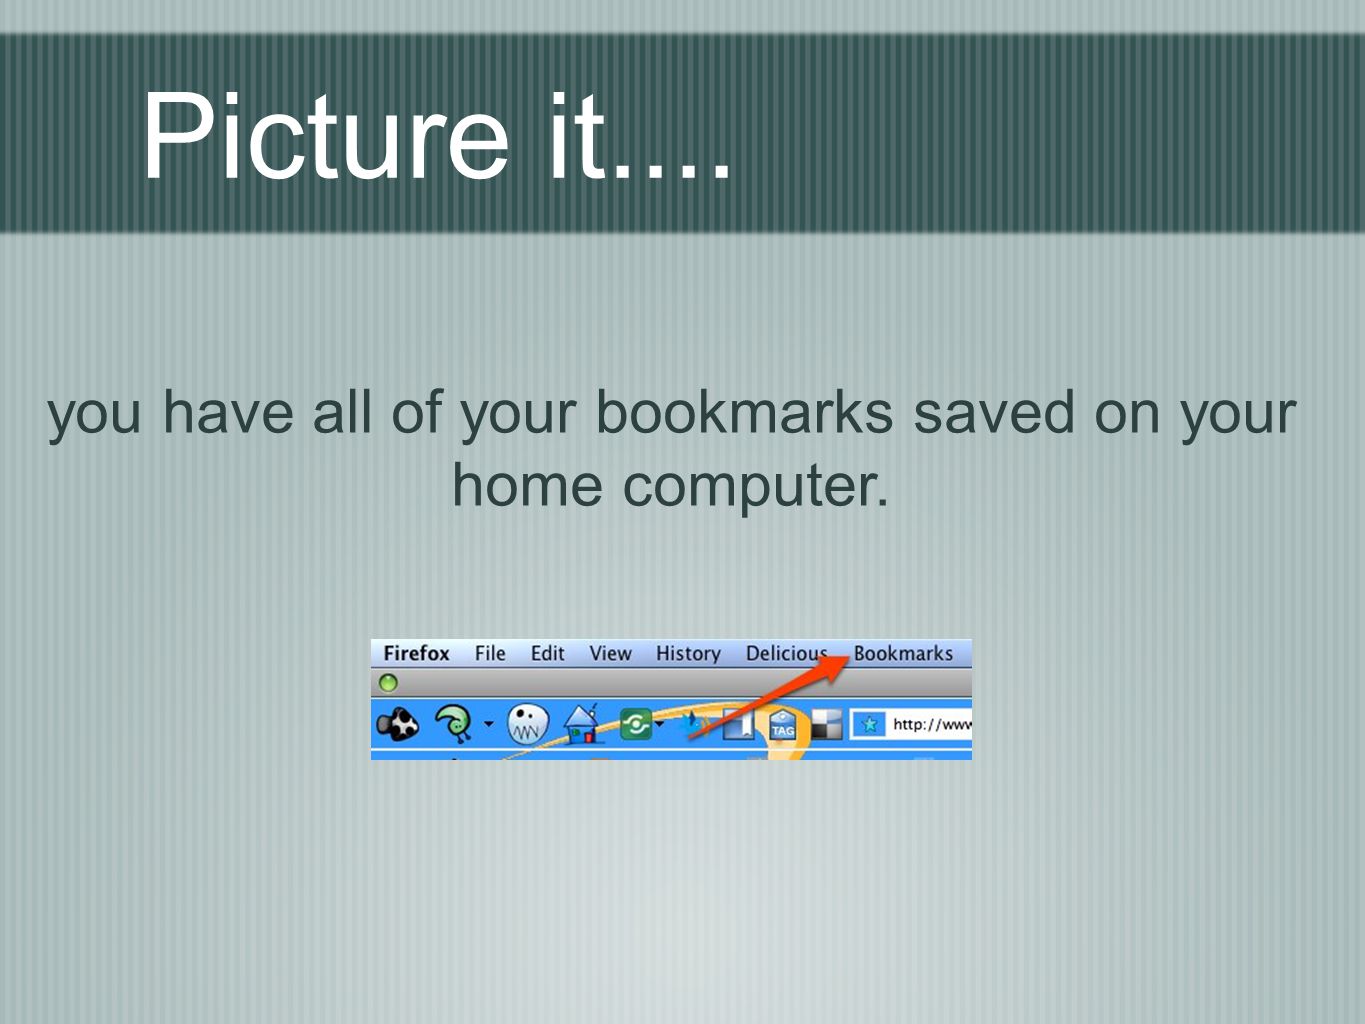 Picture it.... you have all of your bookmarks saved on your home computer.